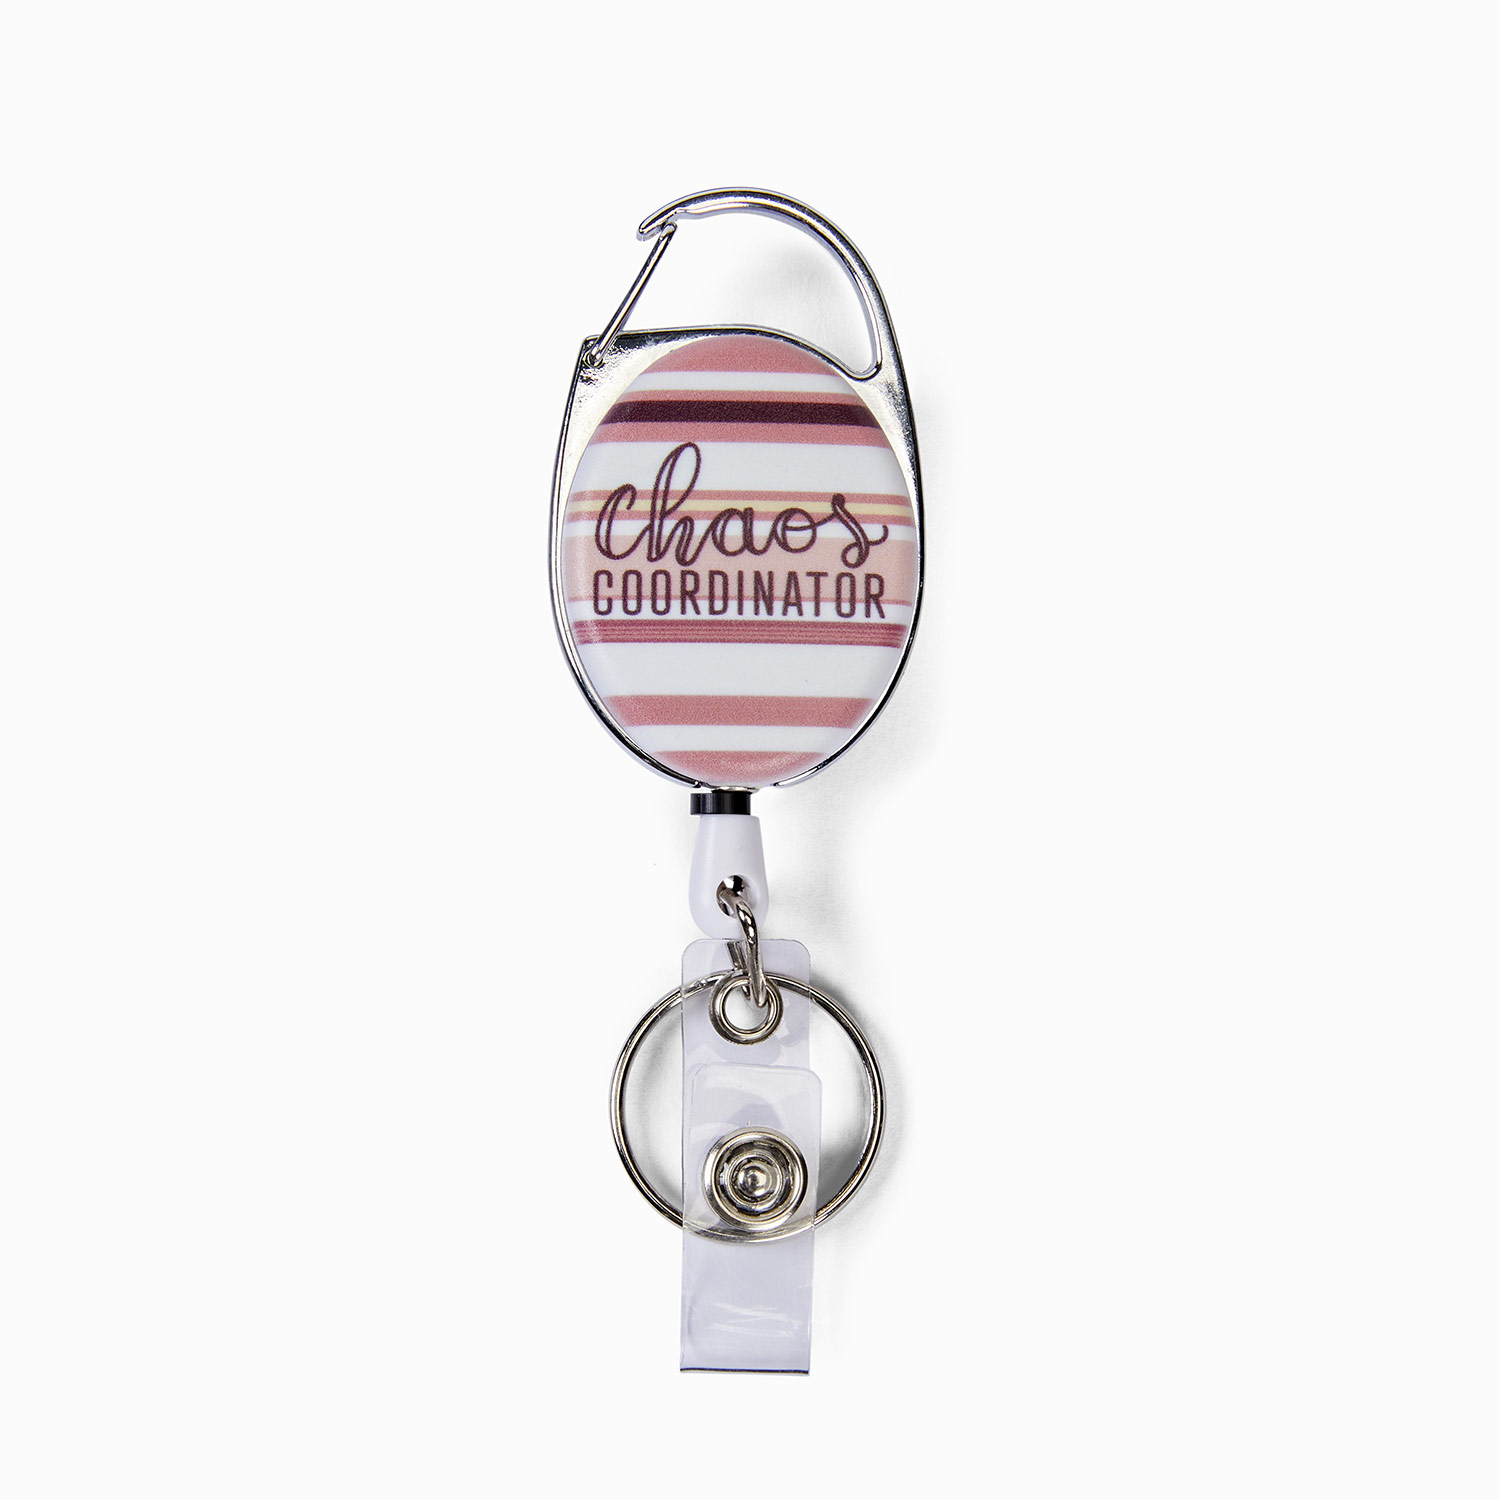 Sedona Stripe Chaos Coordinator - Badge Reel - Thirty-One Gifts -  Affordable Purses, Totes & Bags